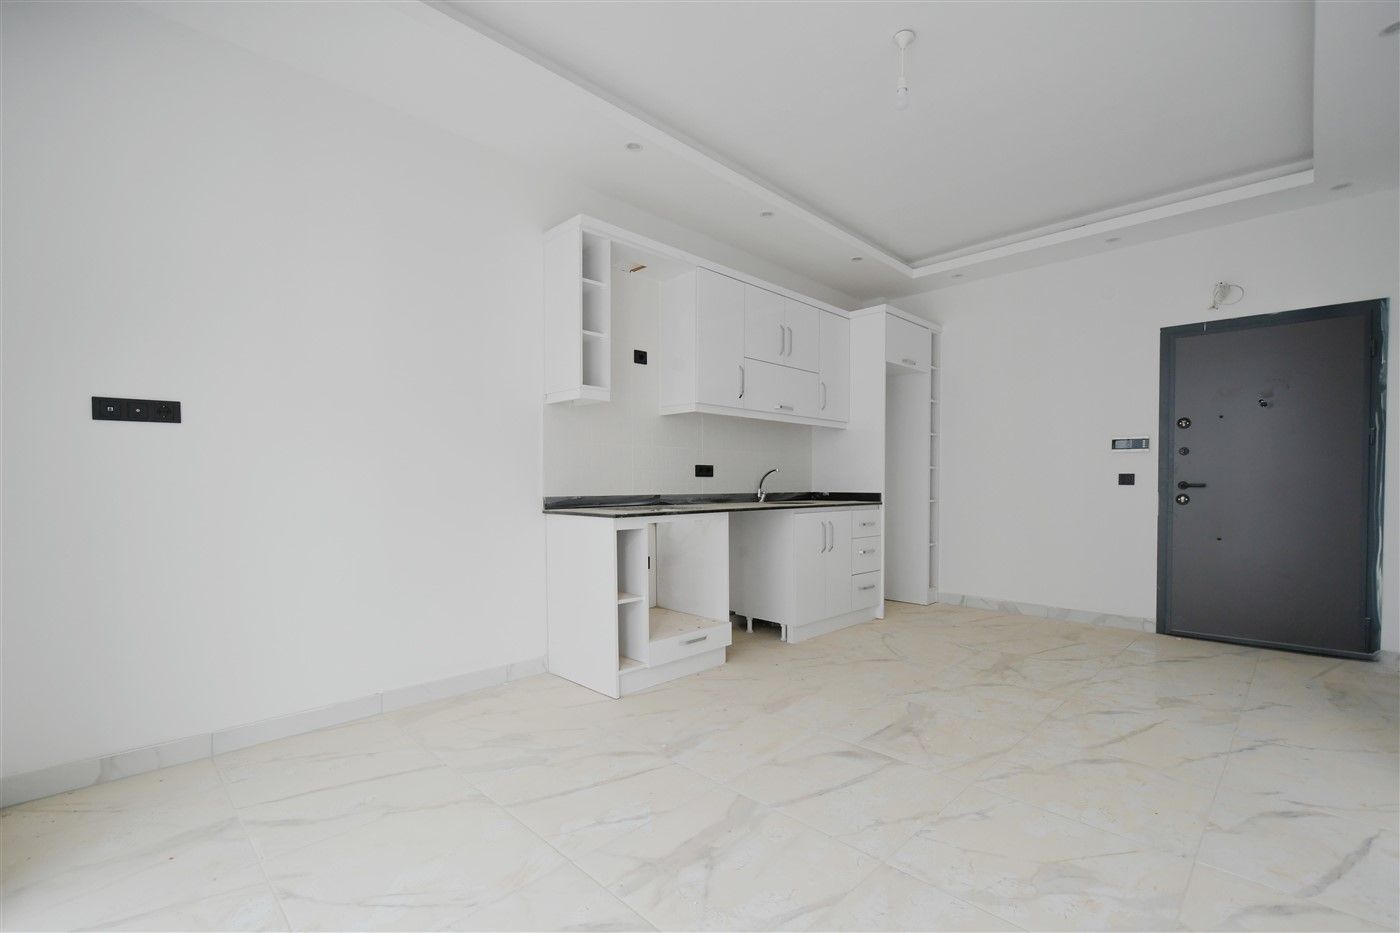 New 1+1 apartment in a picturesque district of Alanya - Avsallar